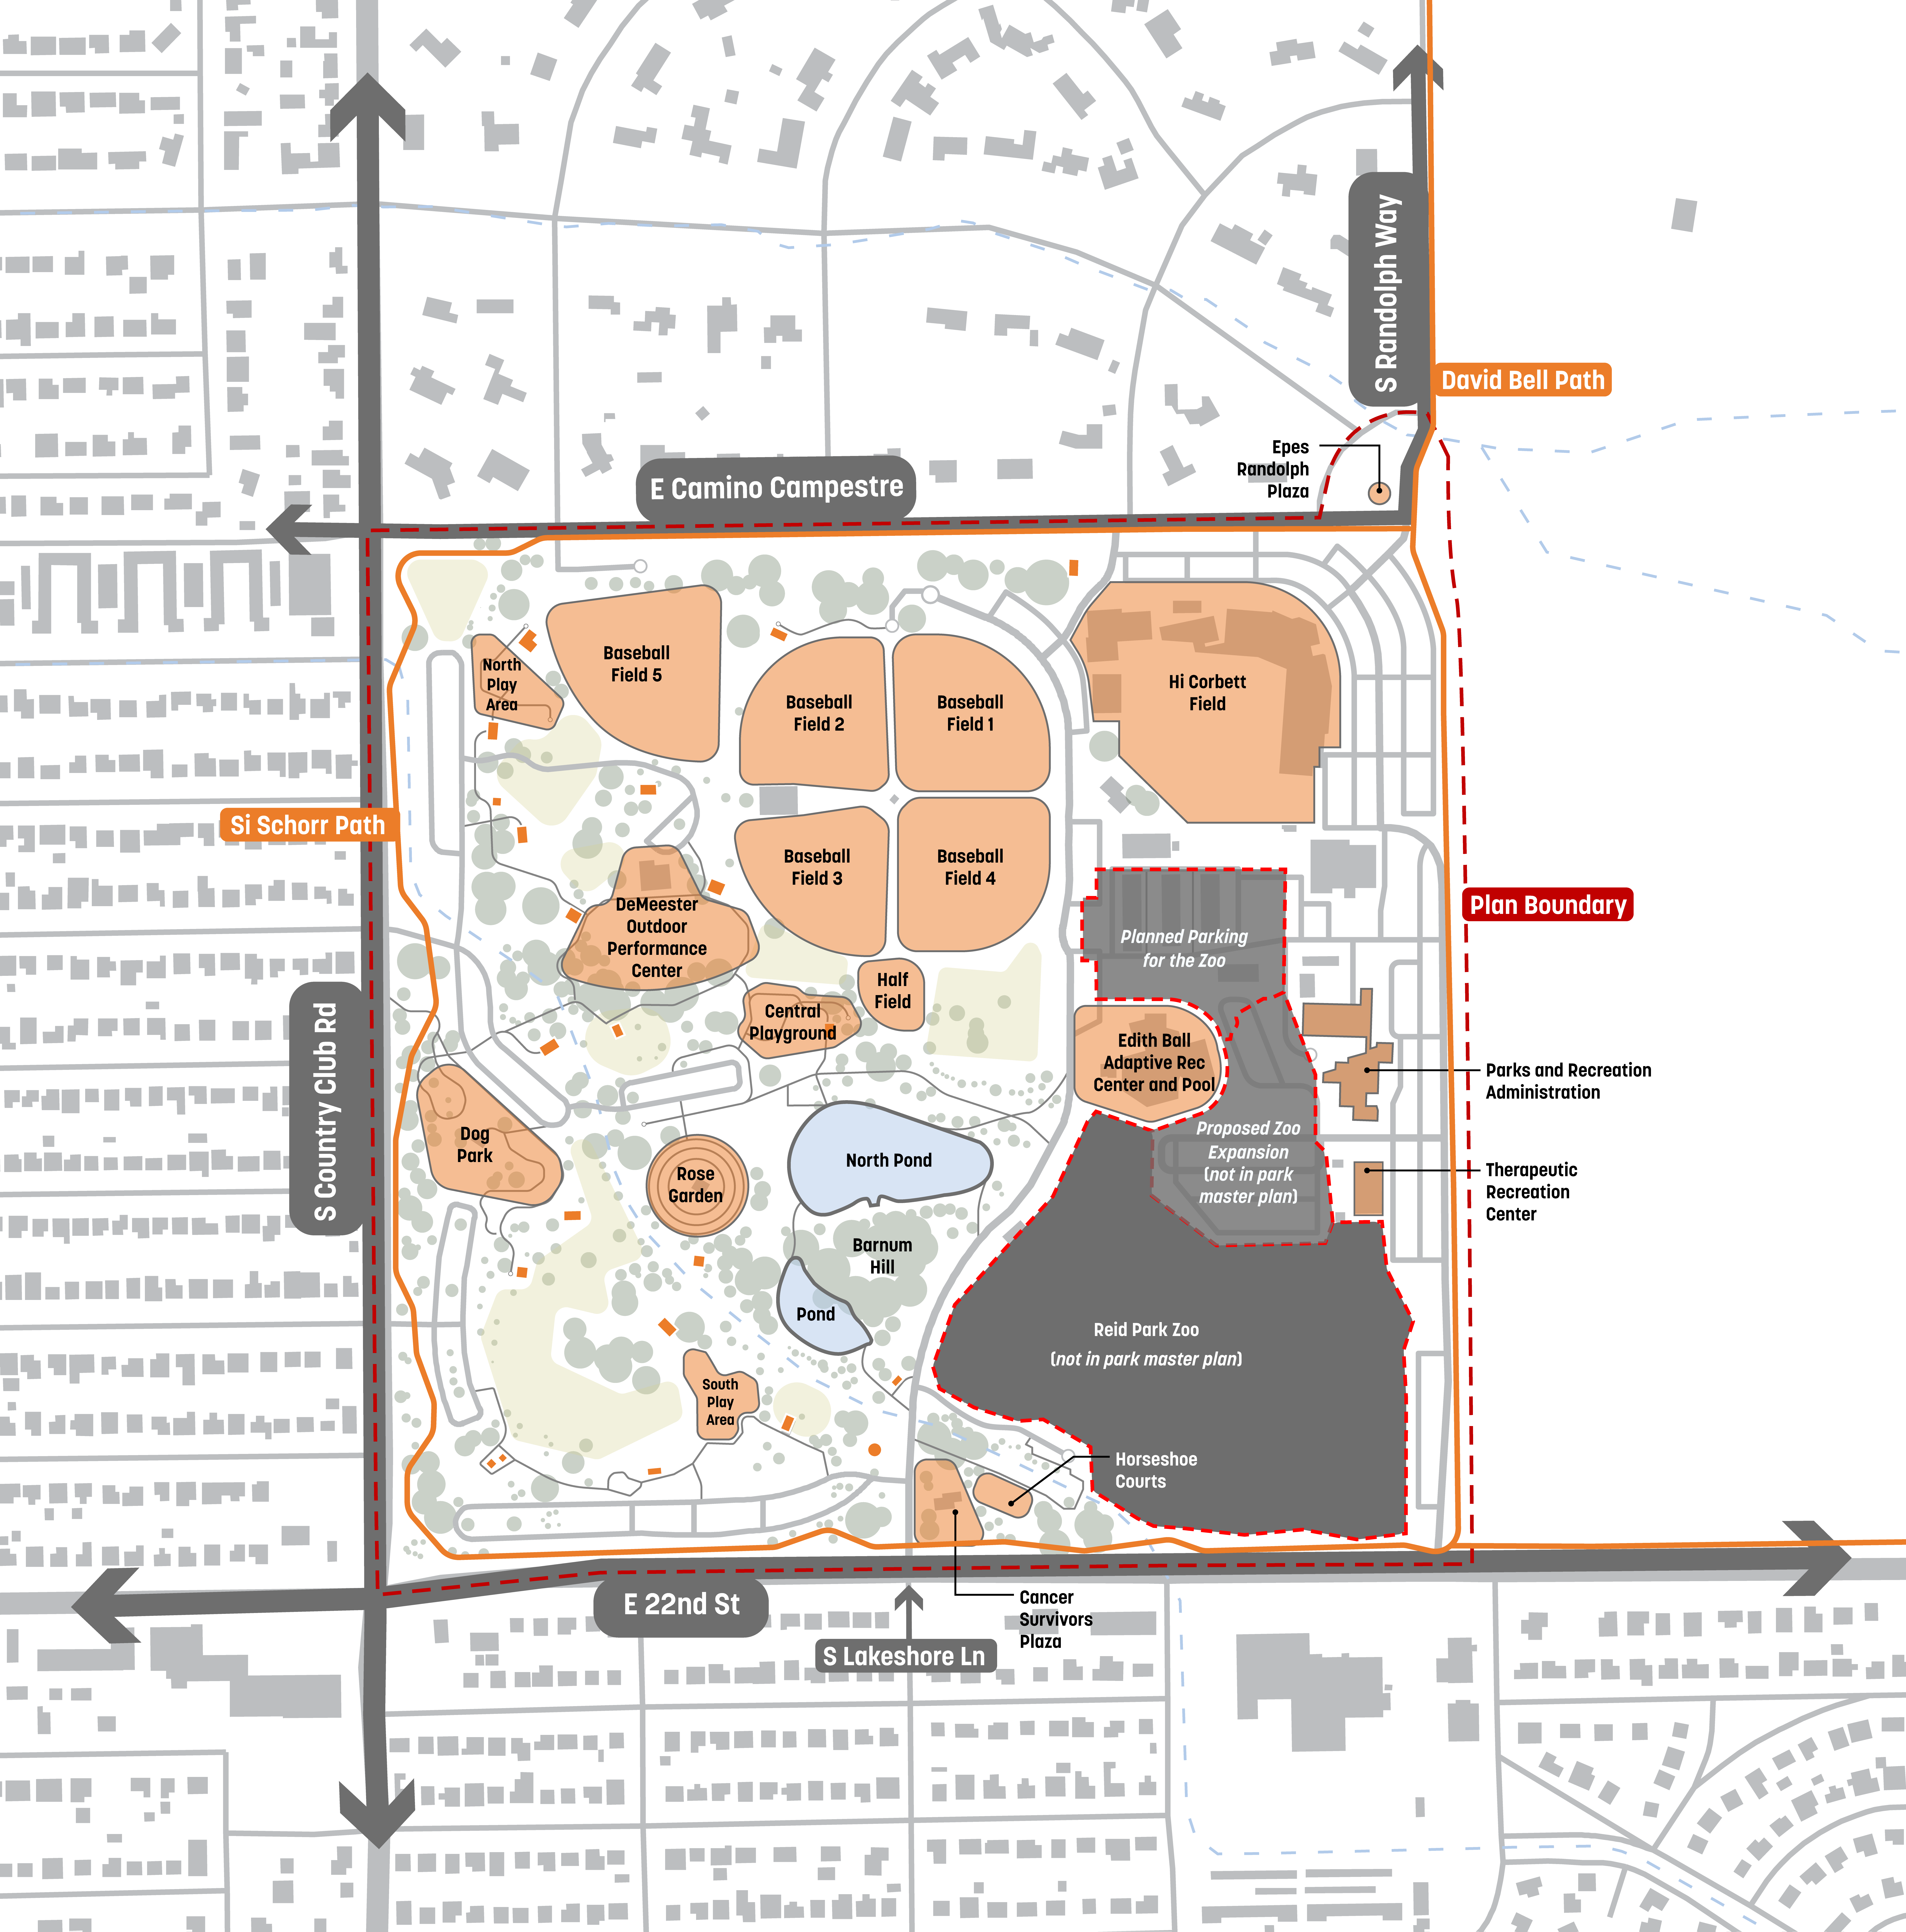 A map showing the proposed amenities in the new park